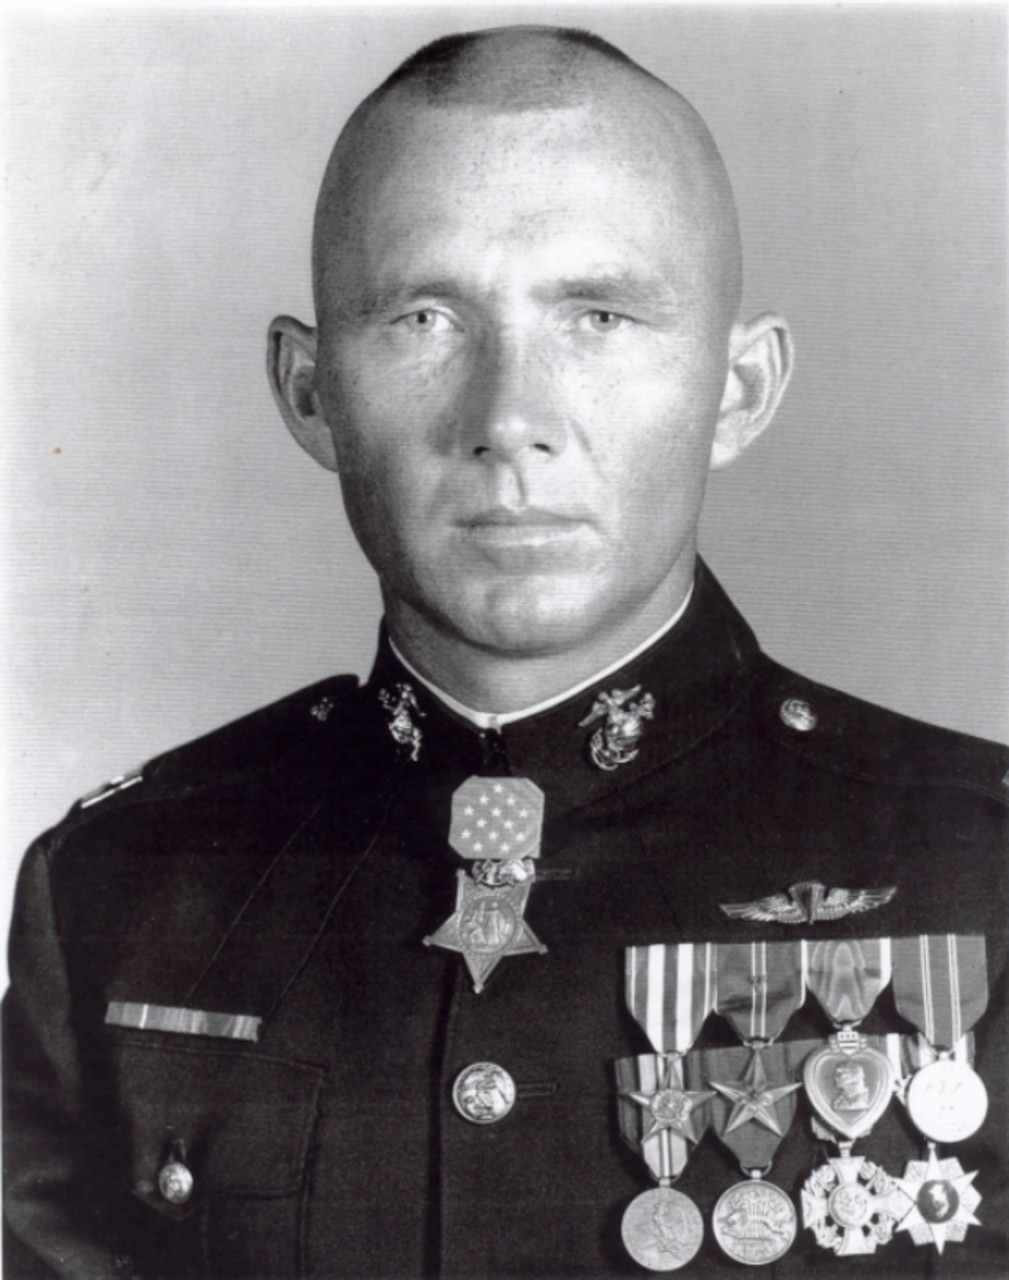 A man wearing a dress uniform and several medals poses for a photo.